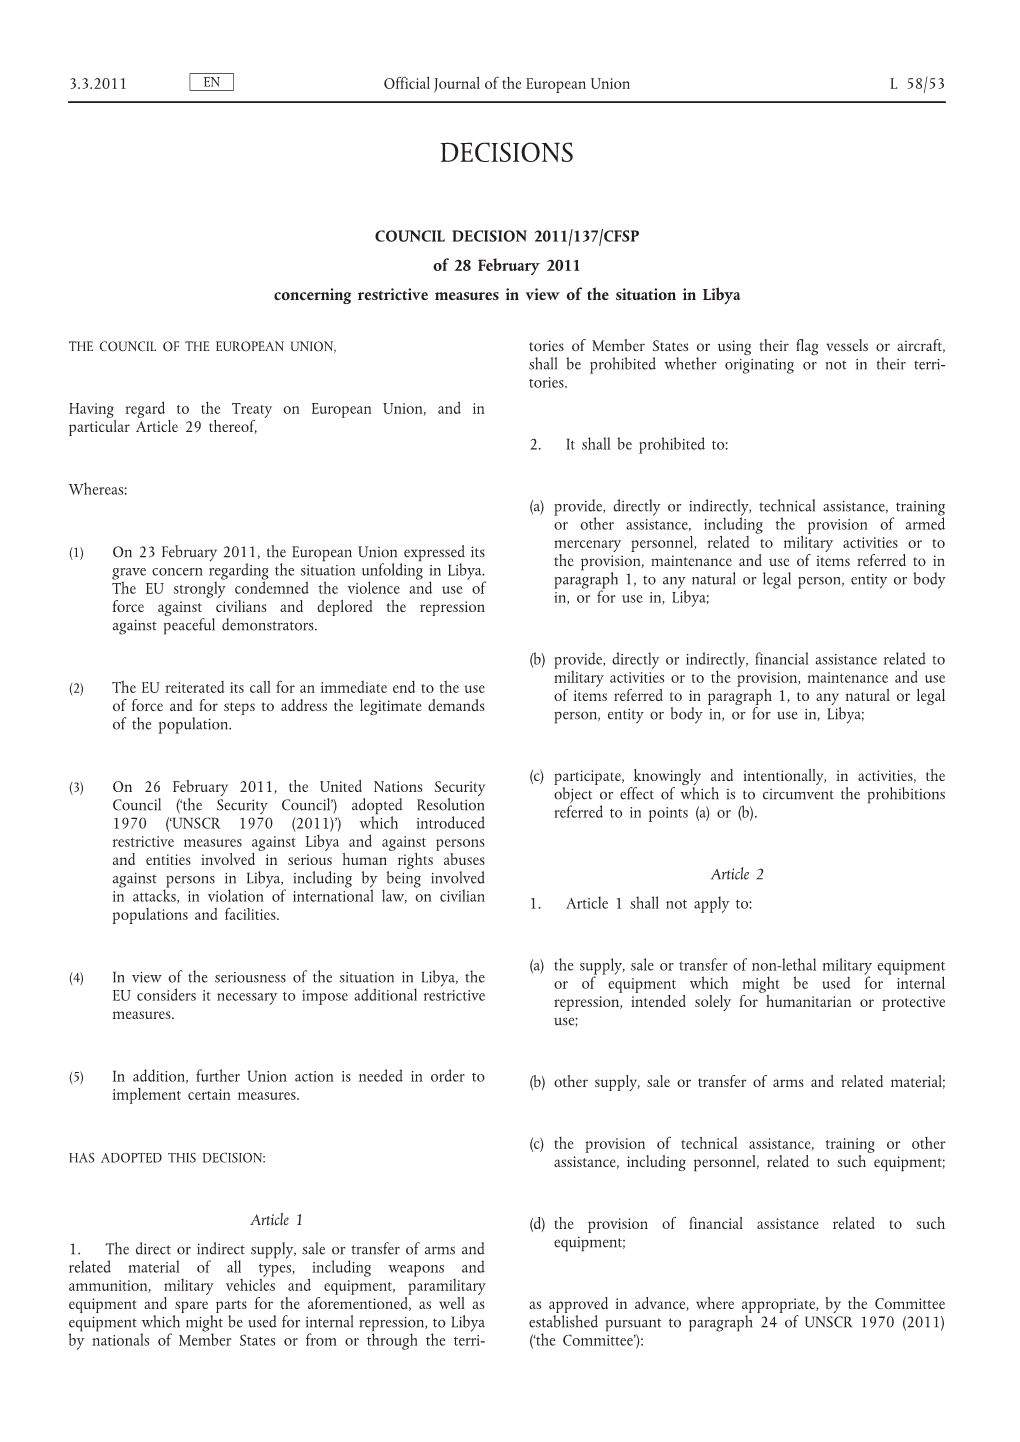 2011/137/CFSP of 28 February 2011 Concerning Restrictive Measures in View of the Situation in Libya